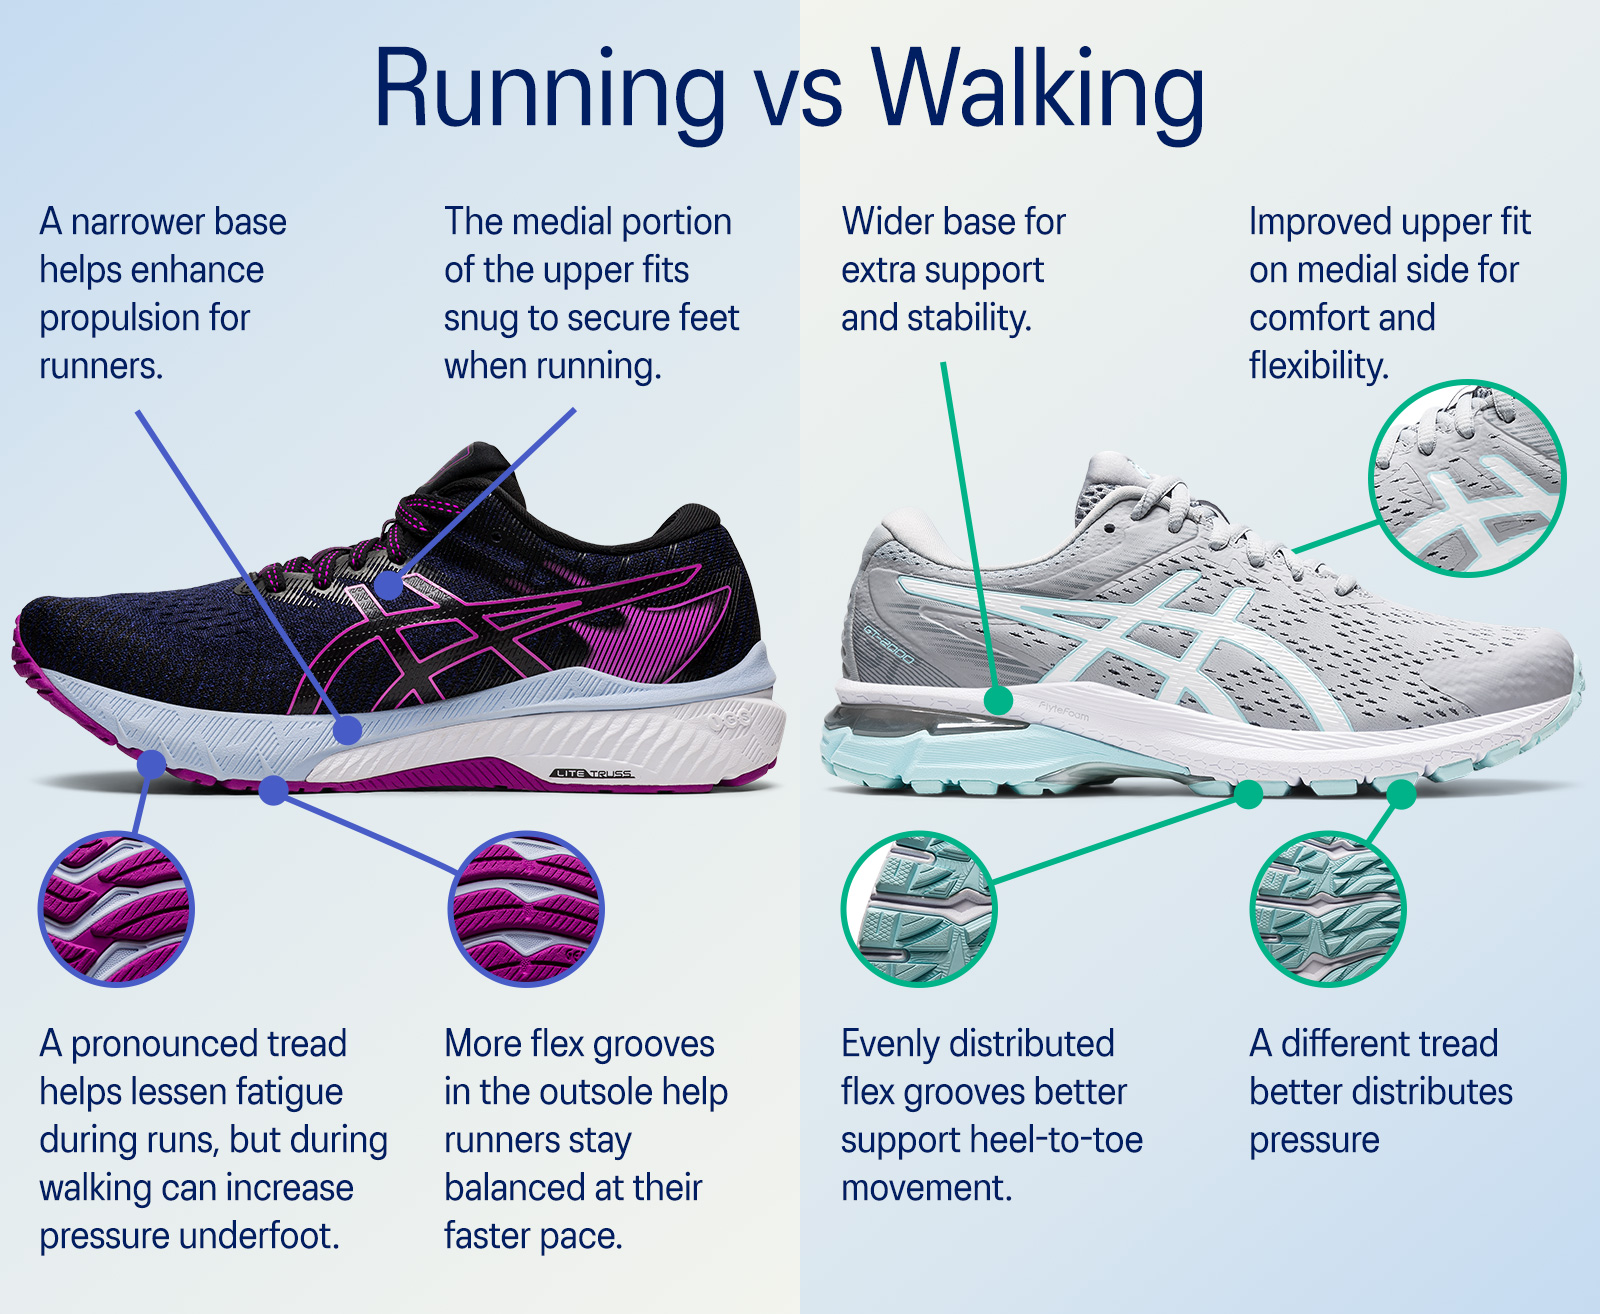 Do Asics Womens Walking Shoes Have Arch Support?